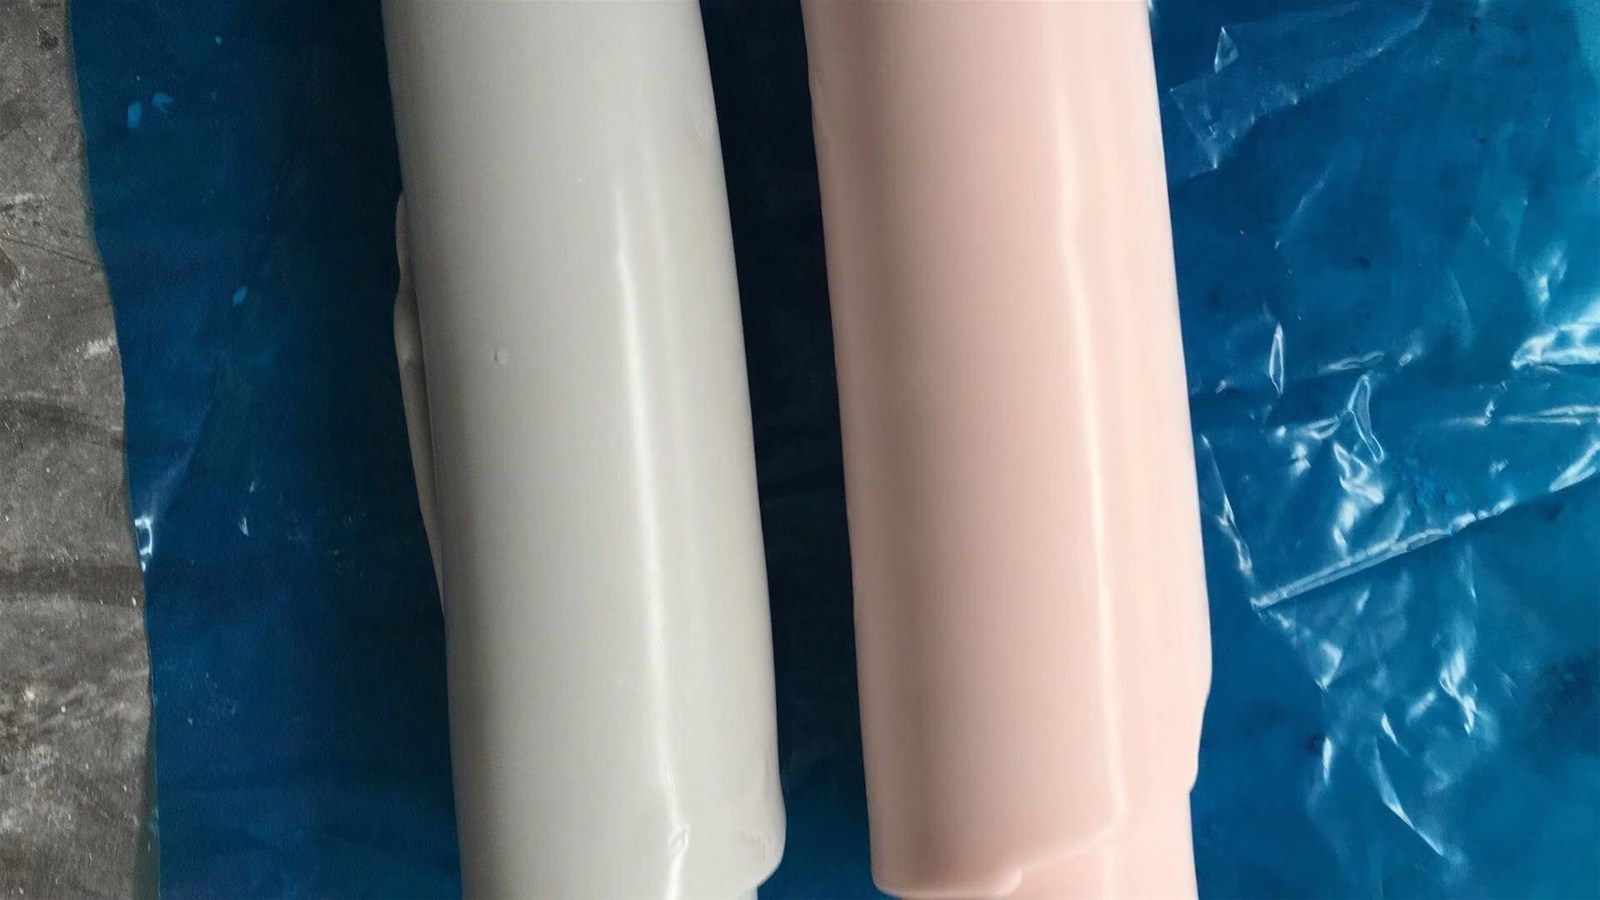 Supply silicone rubber for moliding productsThis product is widely used to manufacture all kinds of molding productsin